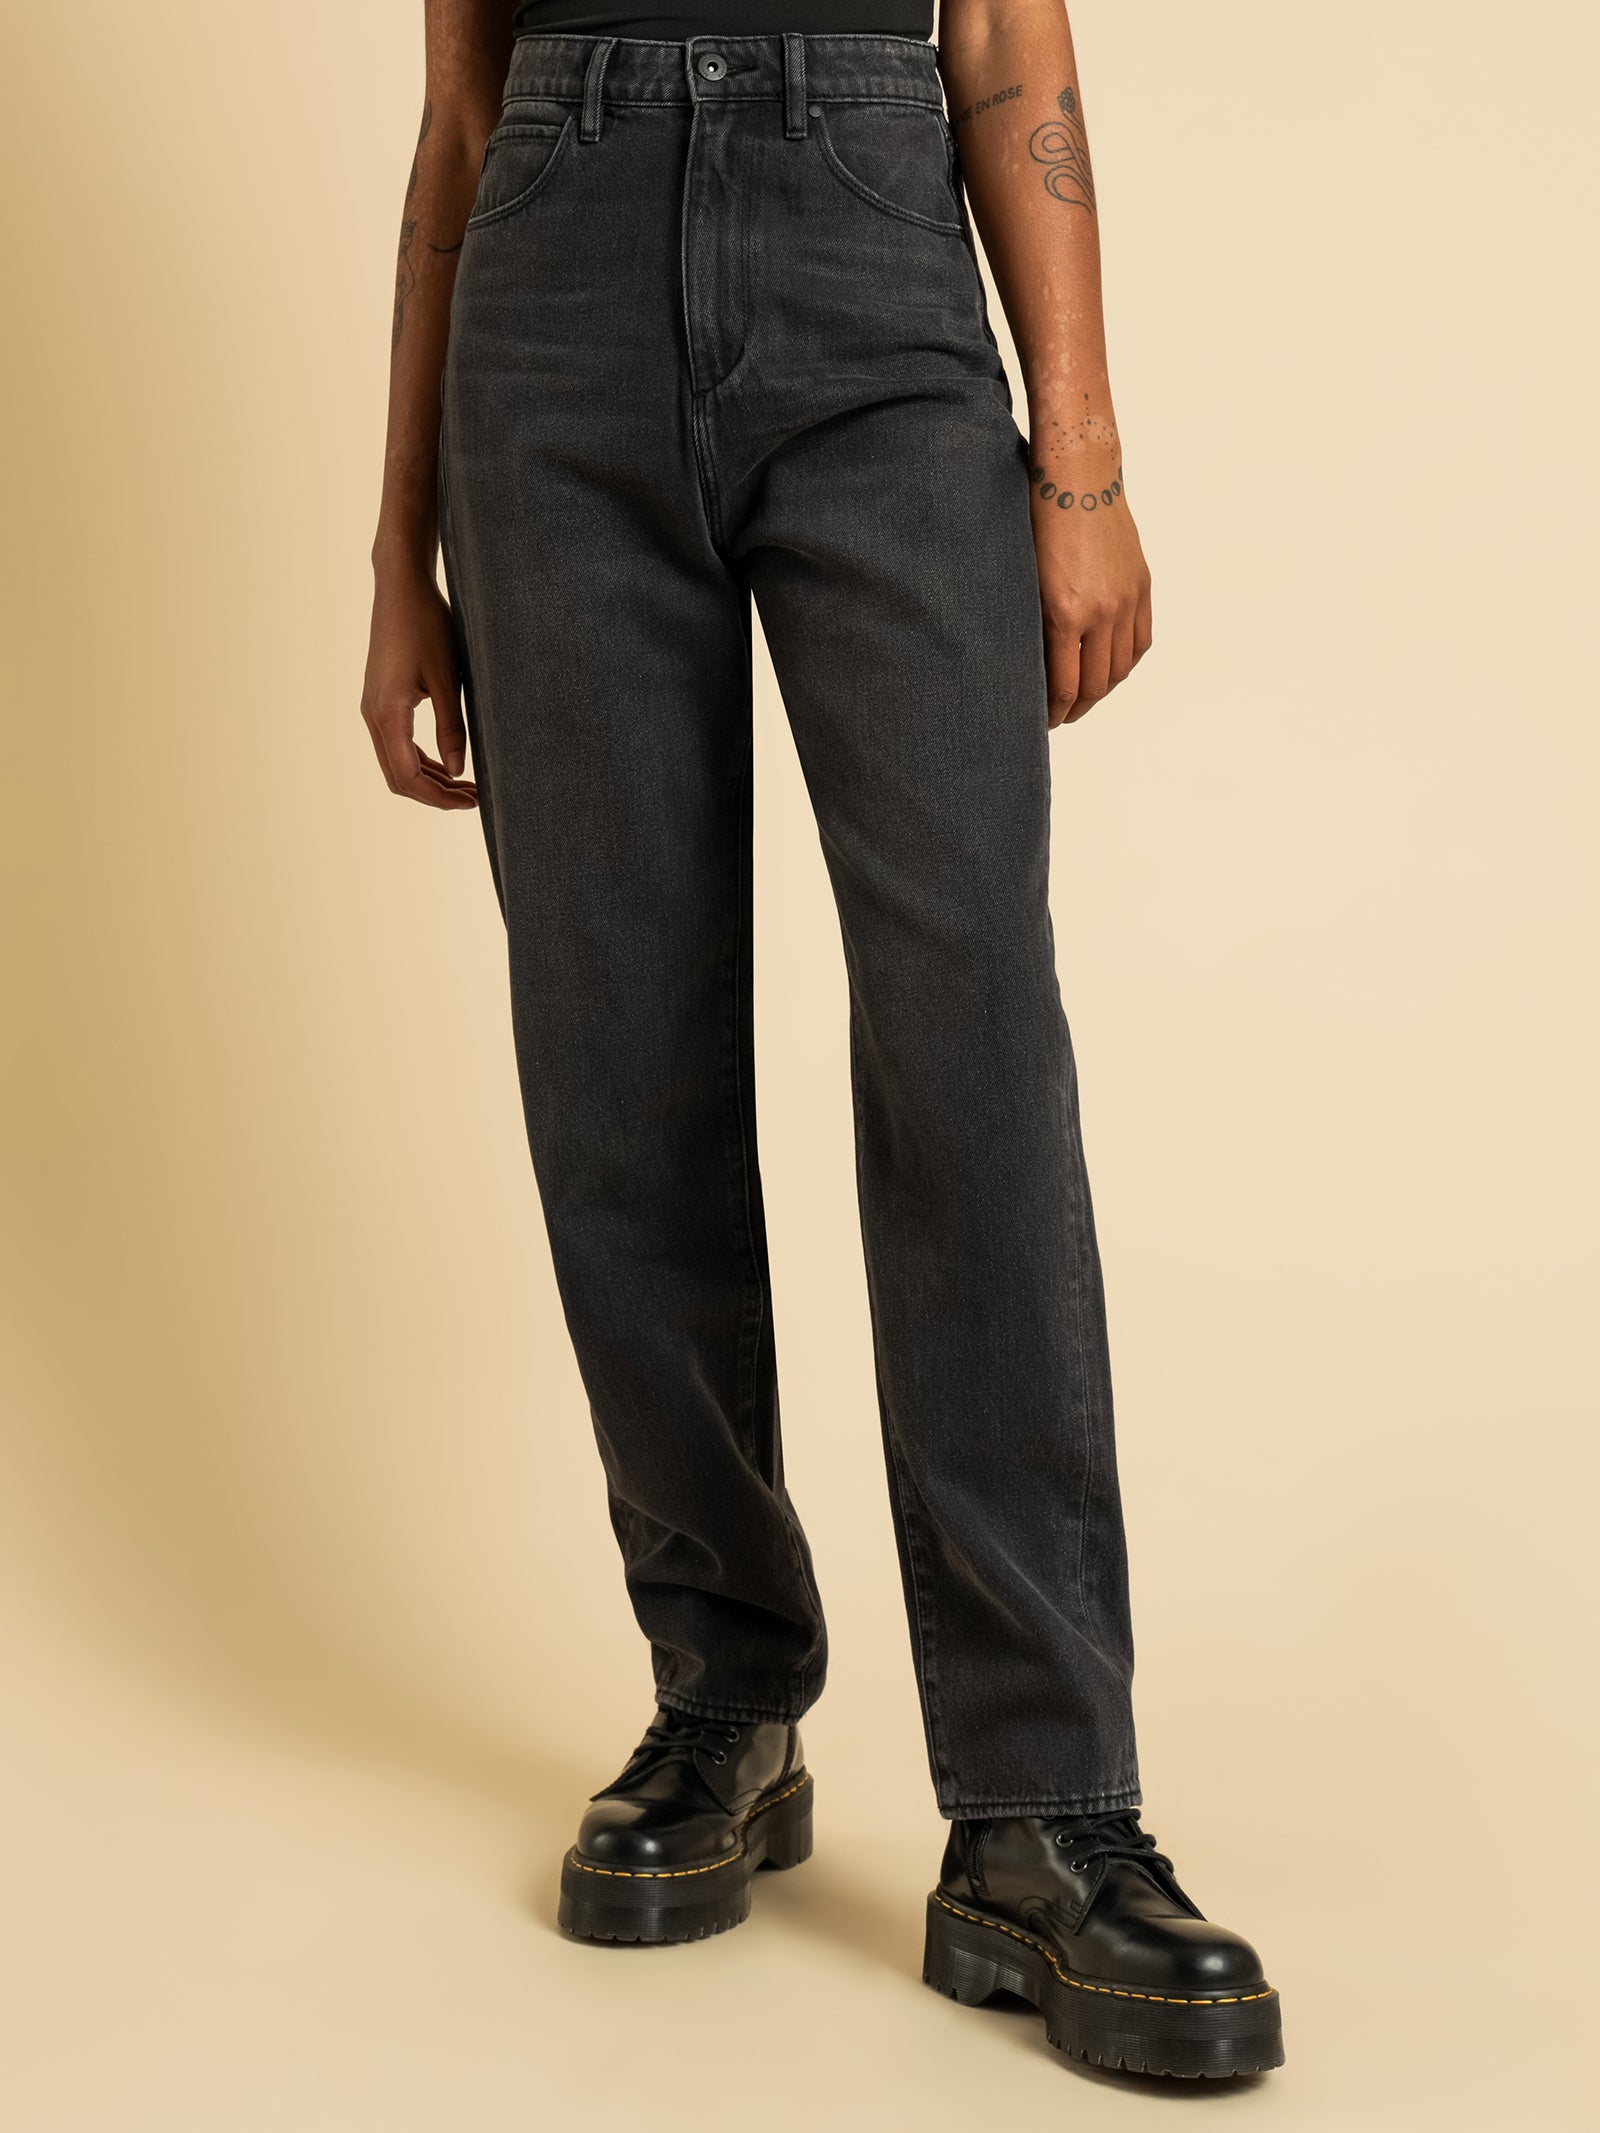 Hailey Baggy Straight Leg Jeans in Destroyed Black - Glue Store